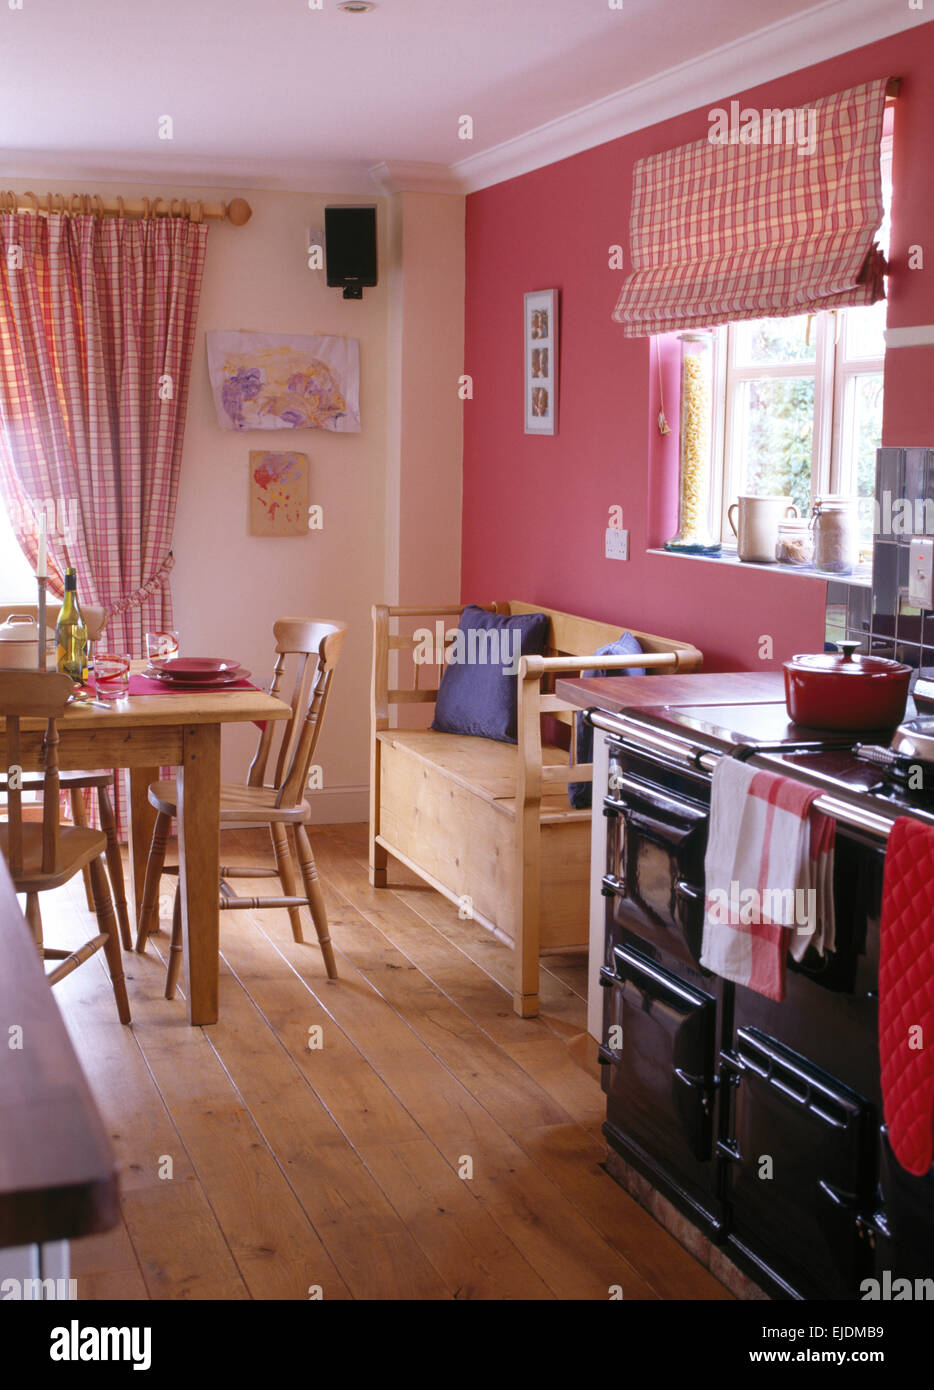 Black Aga and wooden flooring in pink nineties kitchen dining room Stock Photo